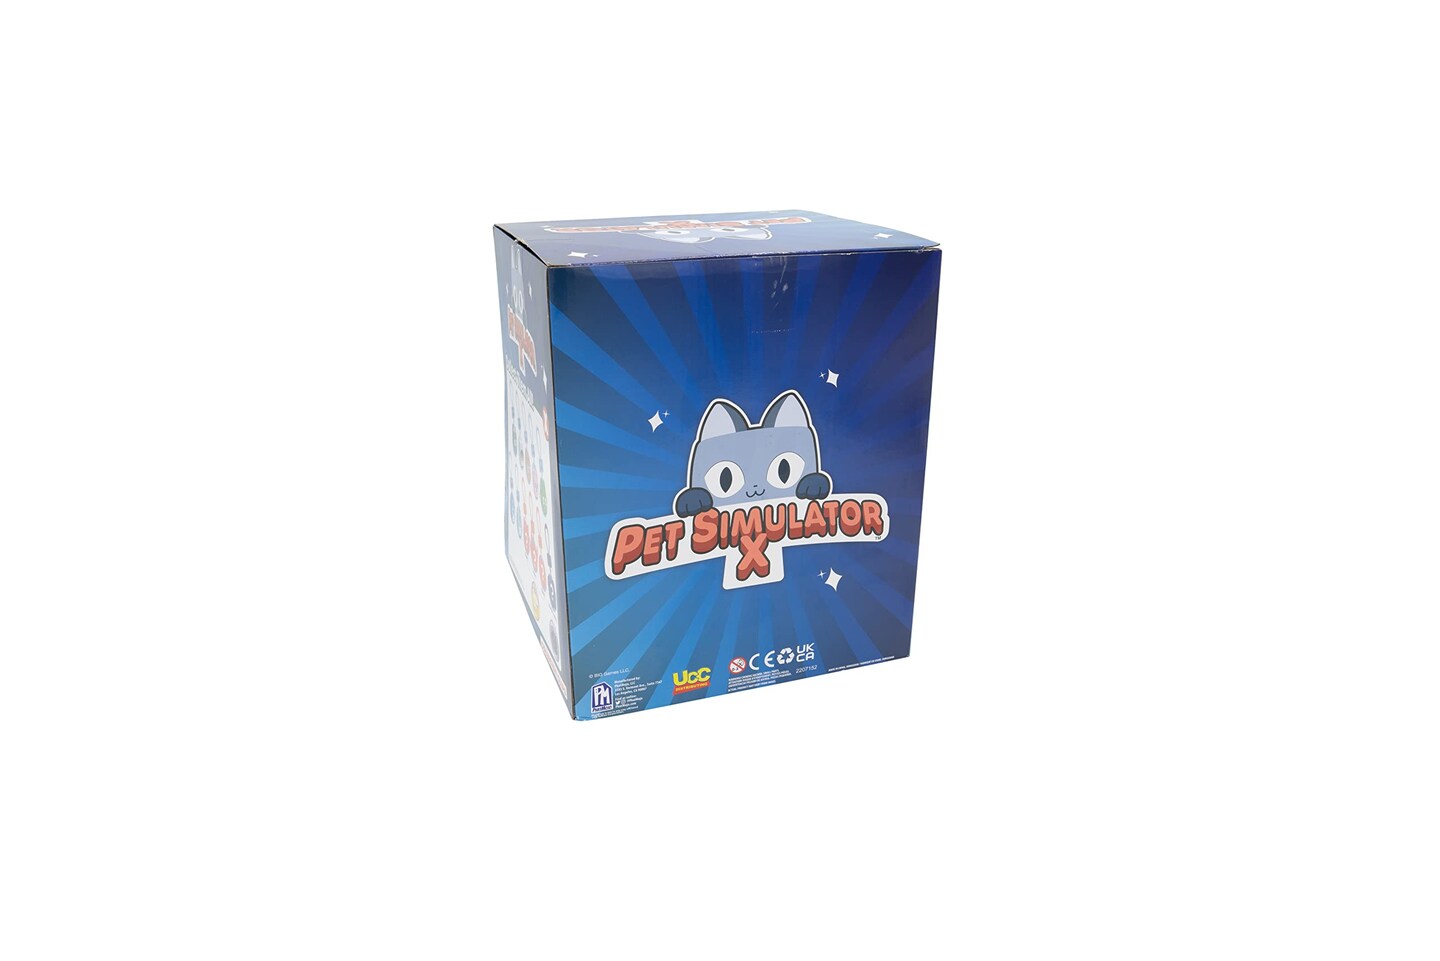 PET Simulator X-Mystery Pet Minifigure Toys with Collector Clip-Blind Bags  24 Pack Box and Chance of DLC Code - Surprise Collectable 